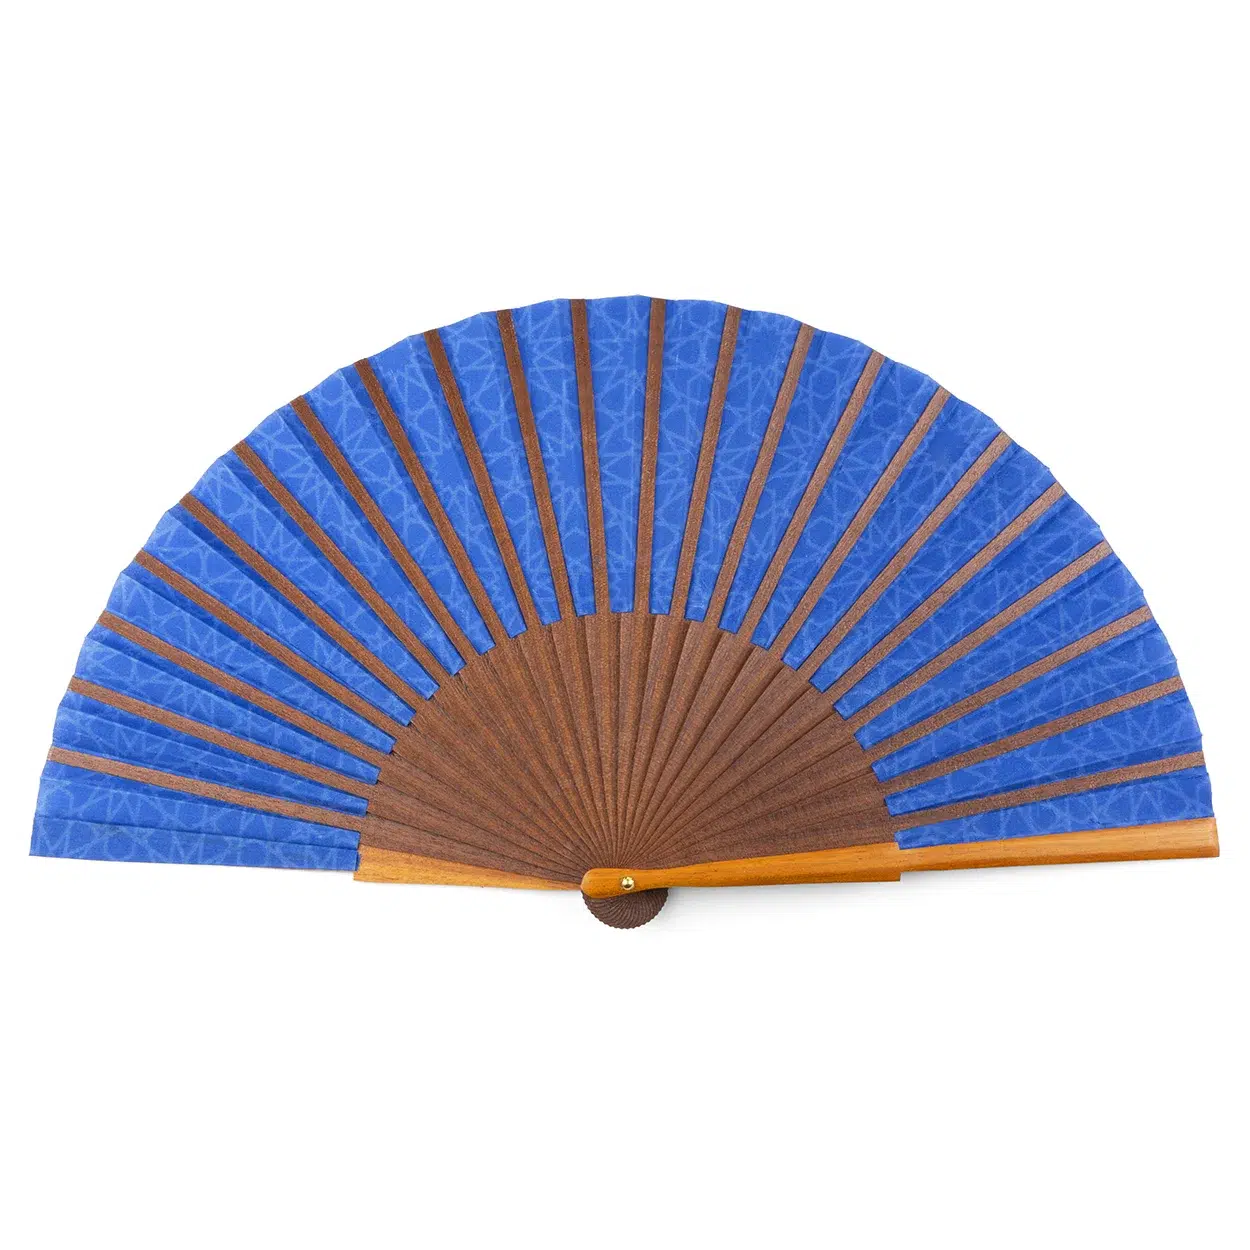 Blue silk and wood fan inspired by the mosaics of Granada.